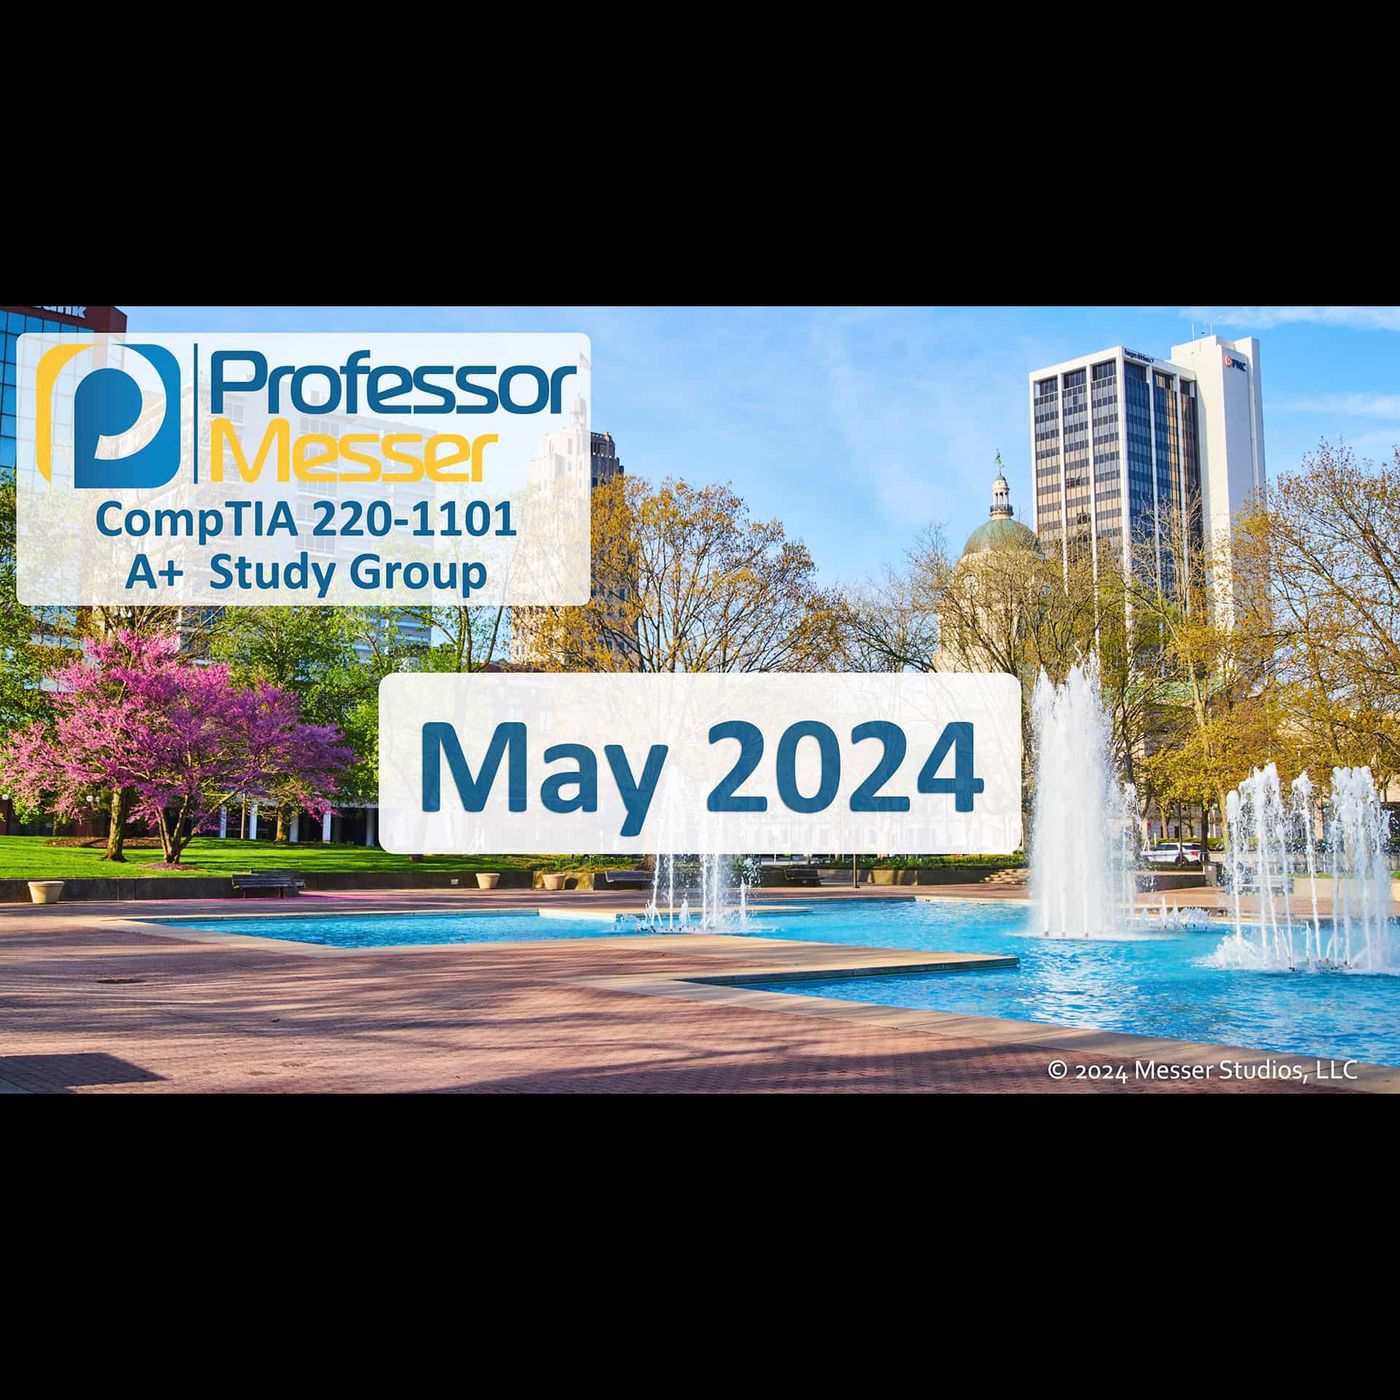 Professor Messer’s CompTIA 220-1101 A+ Study Group - May 2024